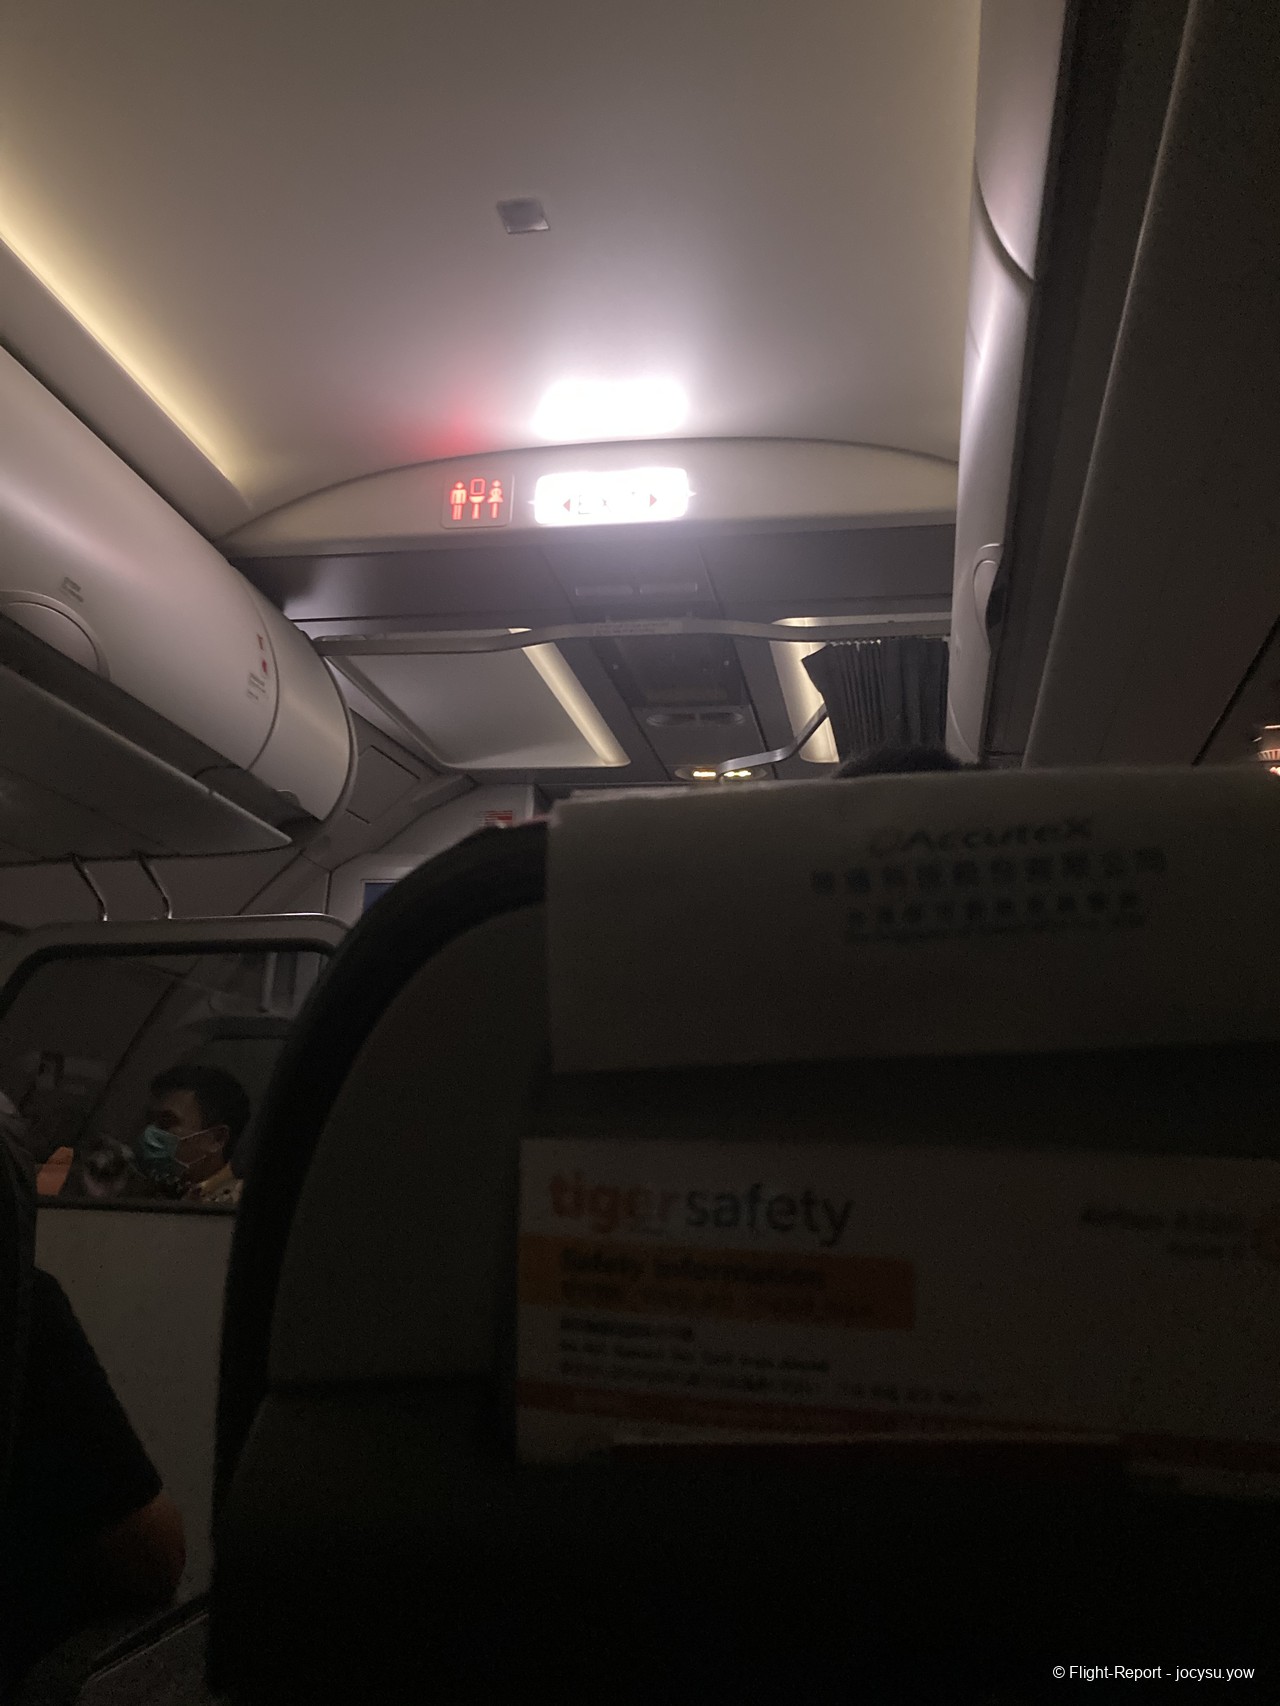 Review of Tigerair Taiwan flight from Makung City to Taipei City in Economy